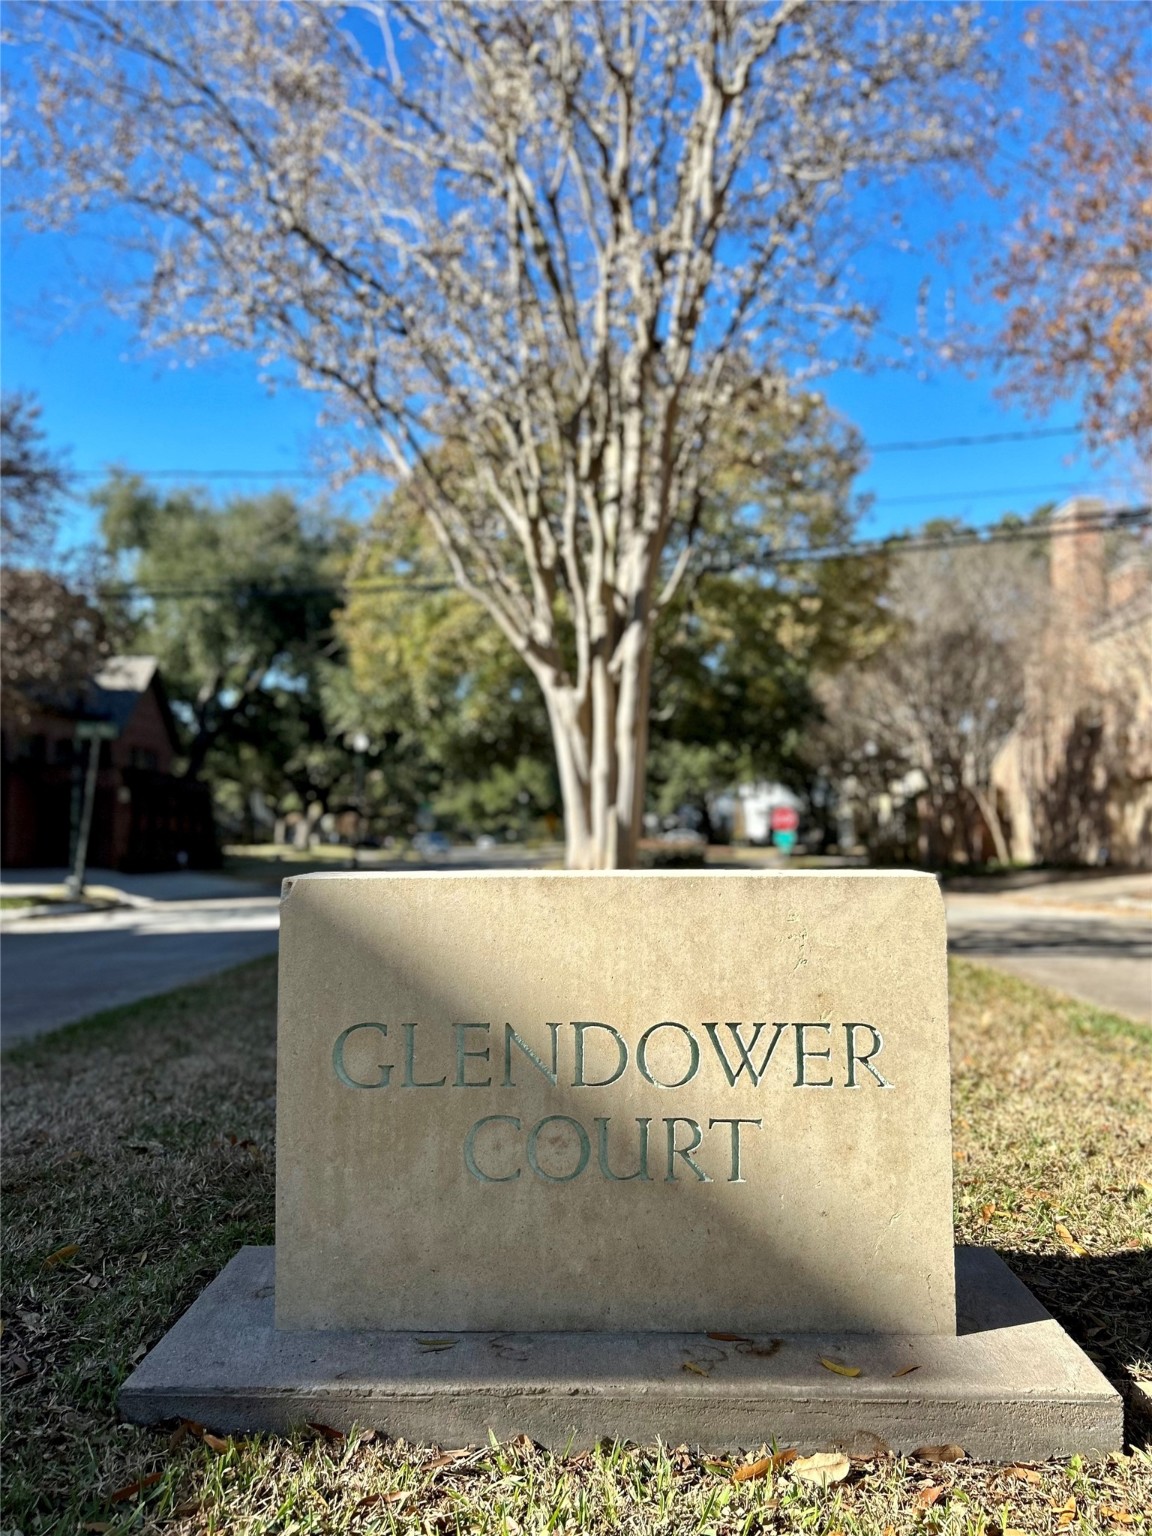 Located in the Glendower Court neighborhood of River Oaks with private security patrol as part of the HOA dues. Stroll the neighborhood and enjoy.